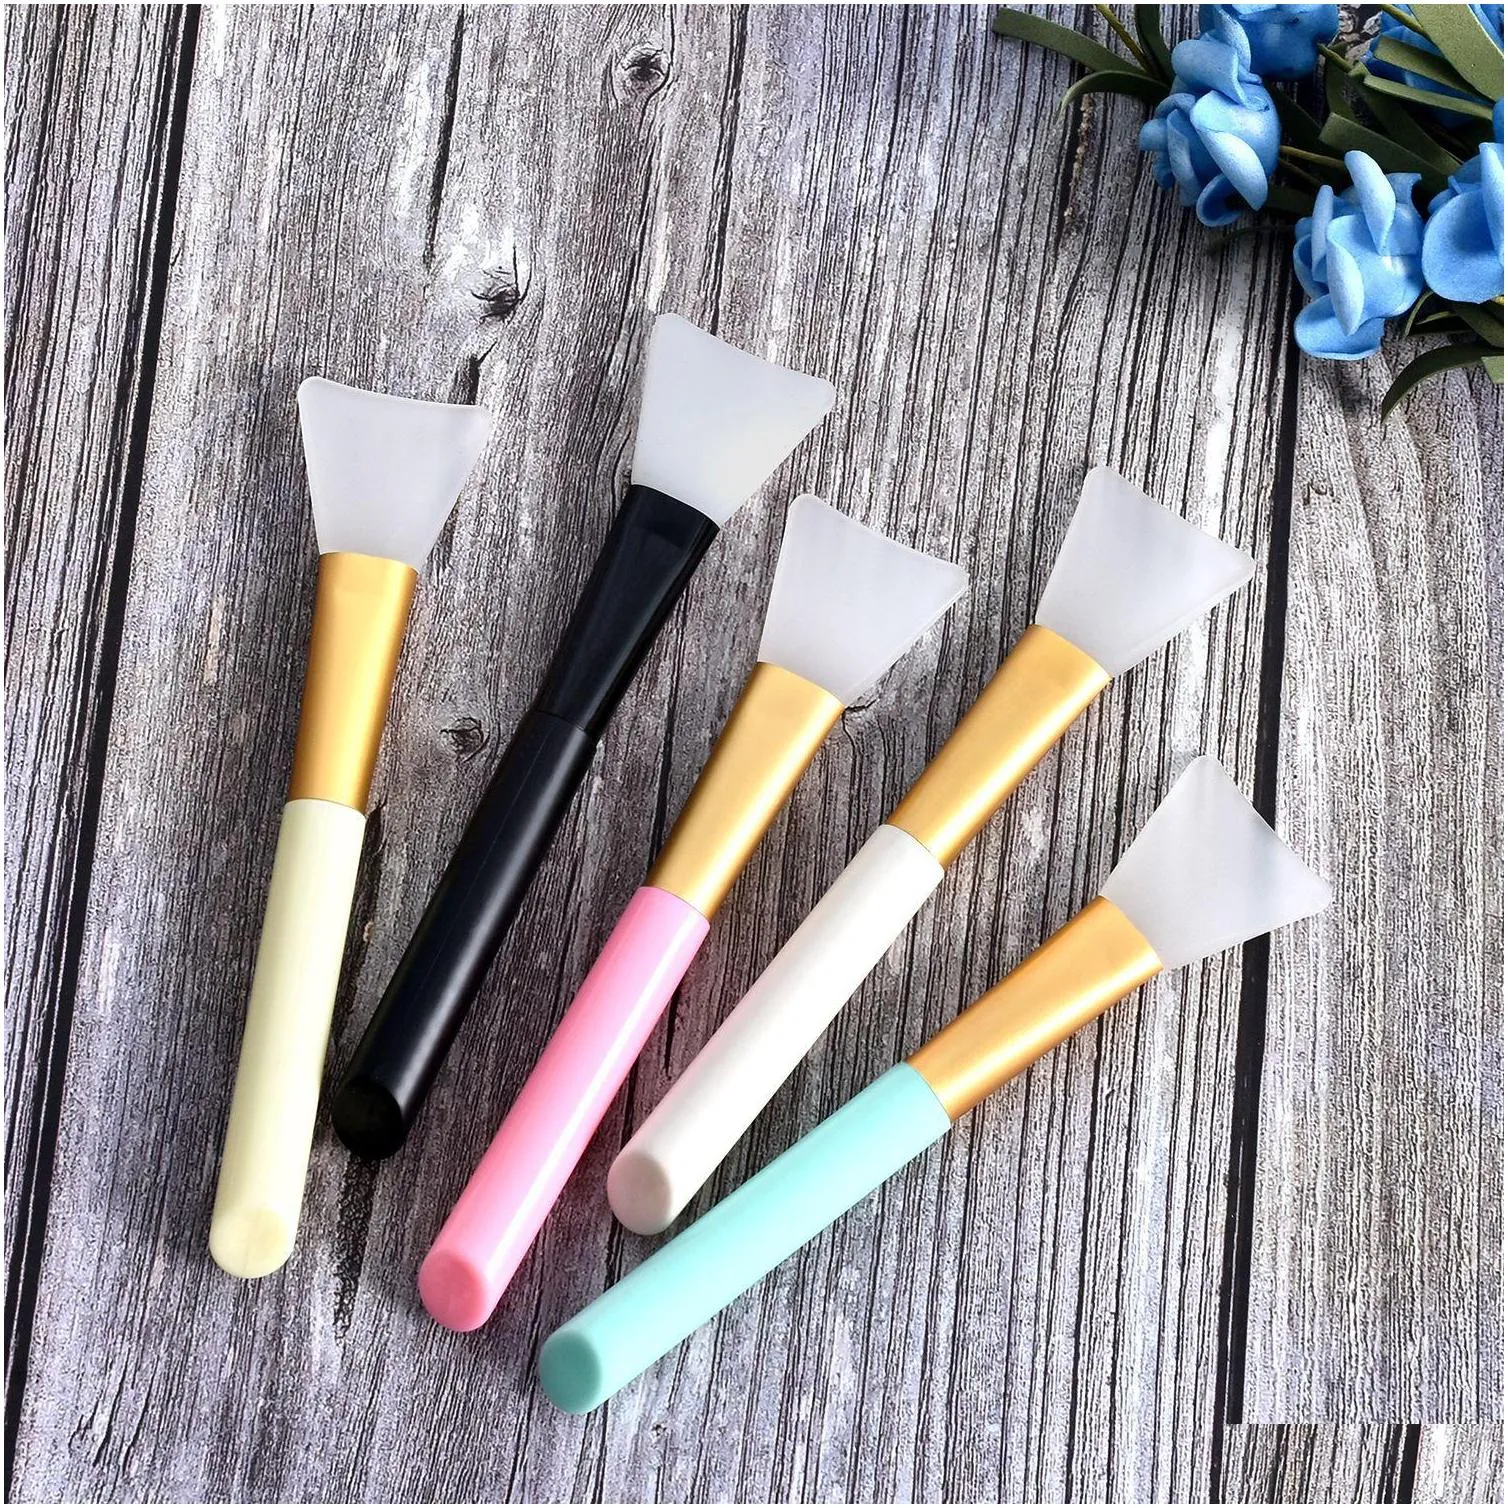 silicone facial mask brush cream mixing silicone makeup brushes face skin care tools makeup tools